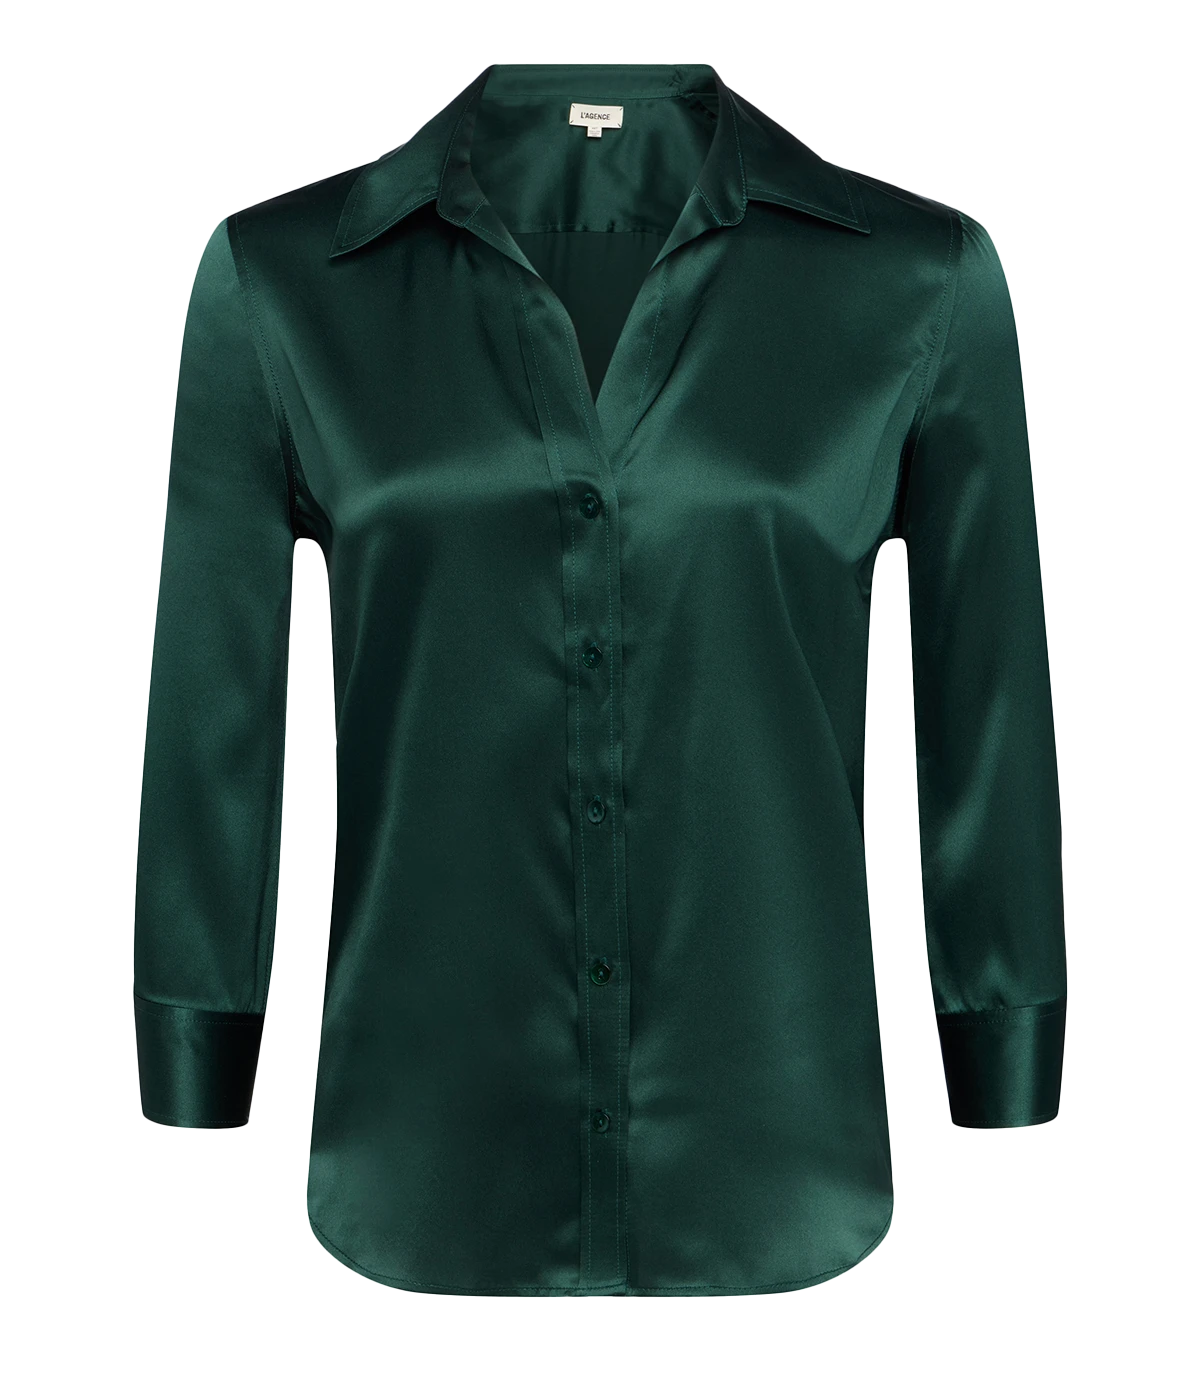 A  three quater sleeve 100% silk blouse in forest green colourway. Luxury materiall, made in USA, 100% silk, bra friendly, comfortable. 